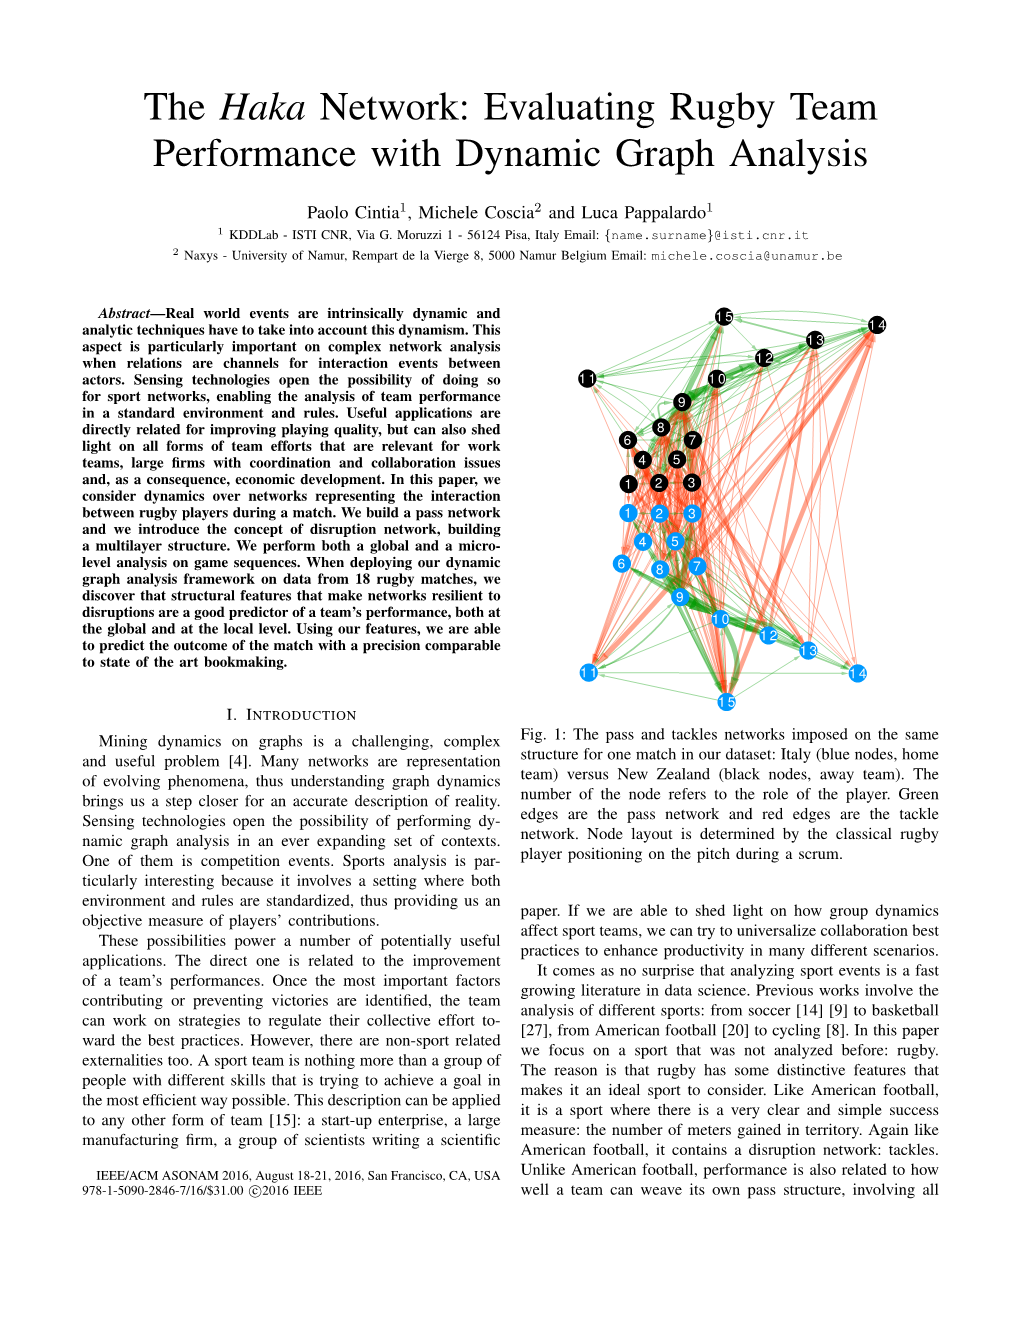 Evaluating Rugby Team Performance with Dynamic Graph Analysis